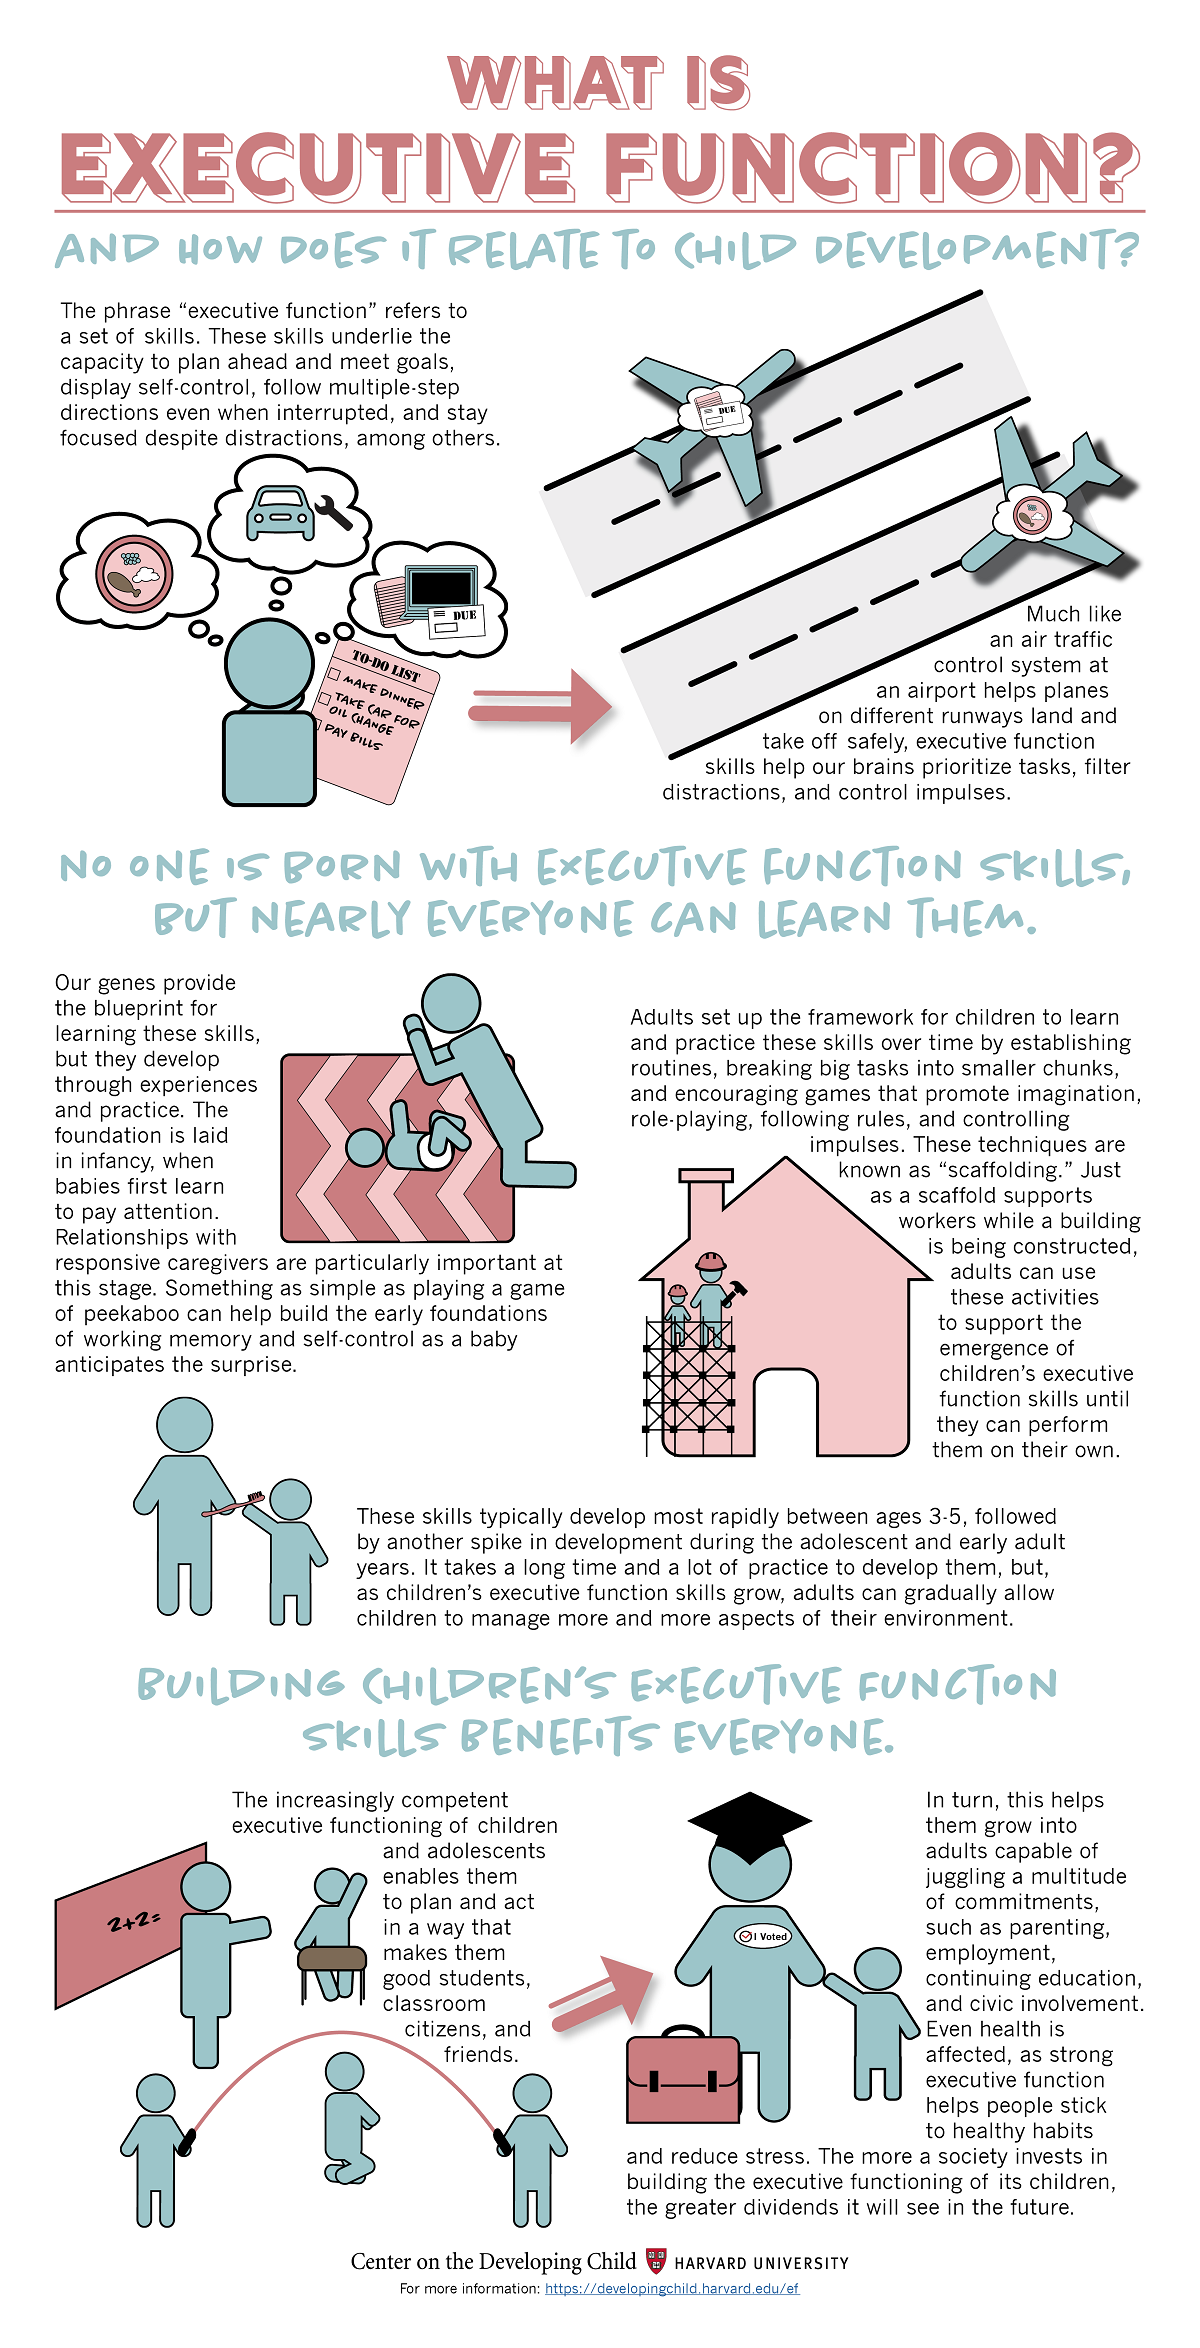 What Is Executive Function? And How Does It Relate to Child Development? #infographic 